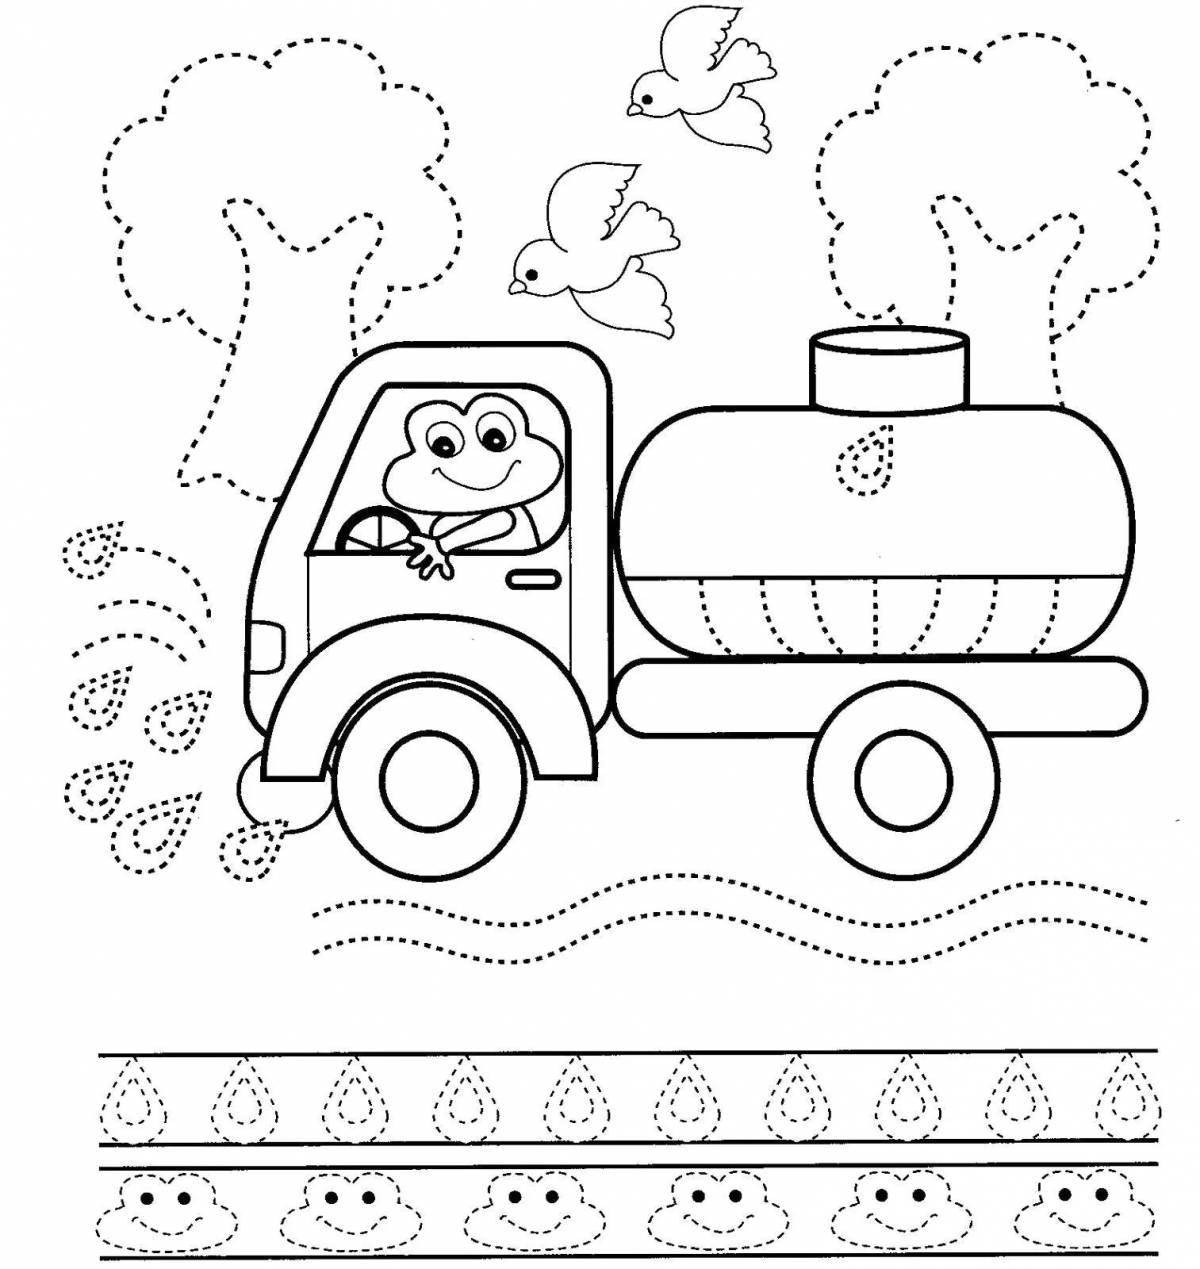 A nice coloring book for children, developing